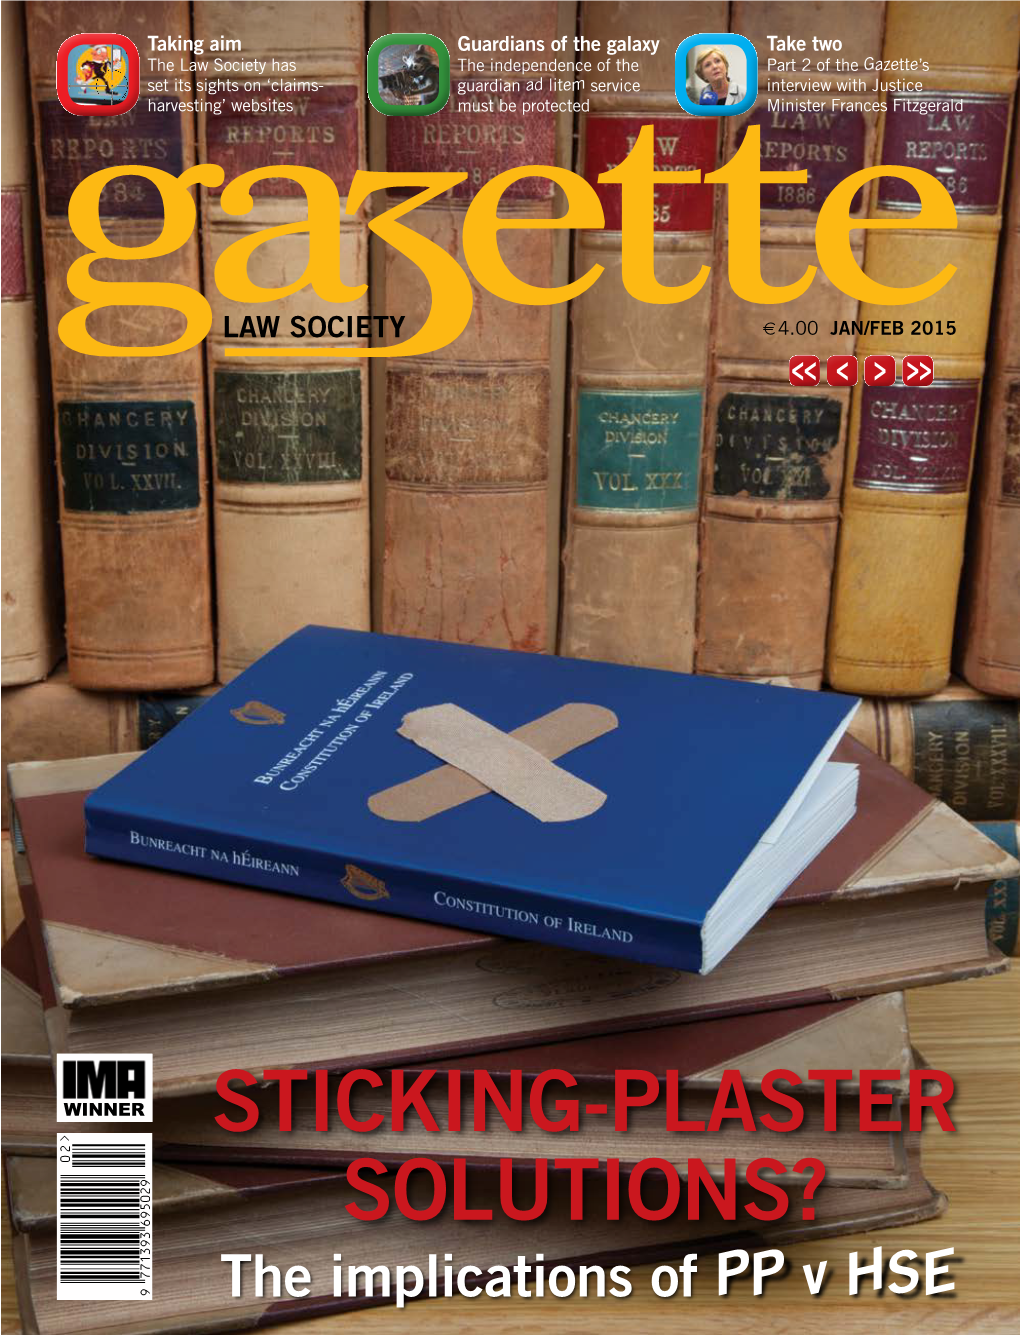 STICKING-PLASTER SOLUTIONS? the Implications of PP V HSE Galaw SOCIETY Ette